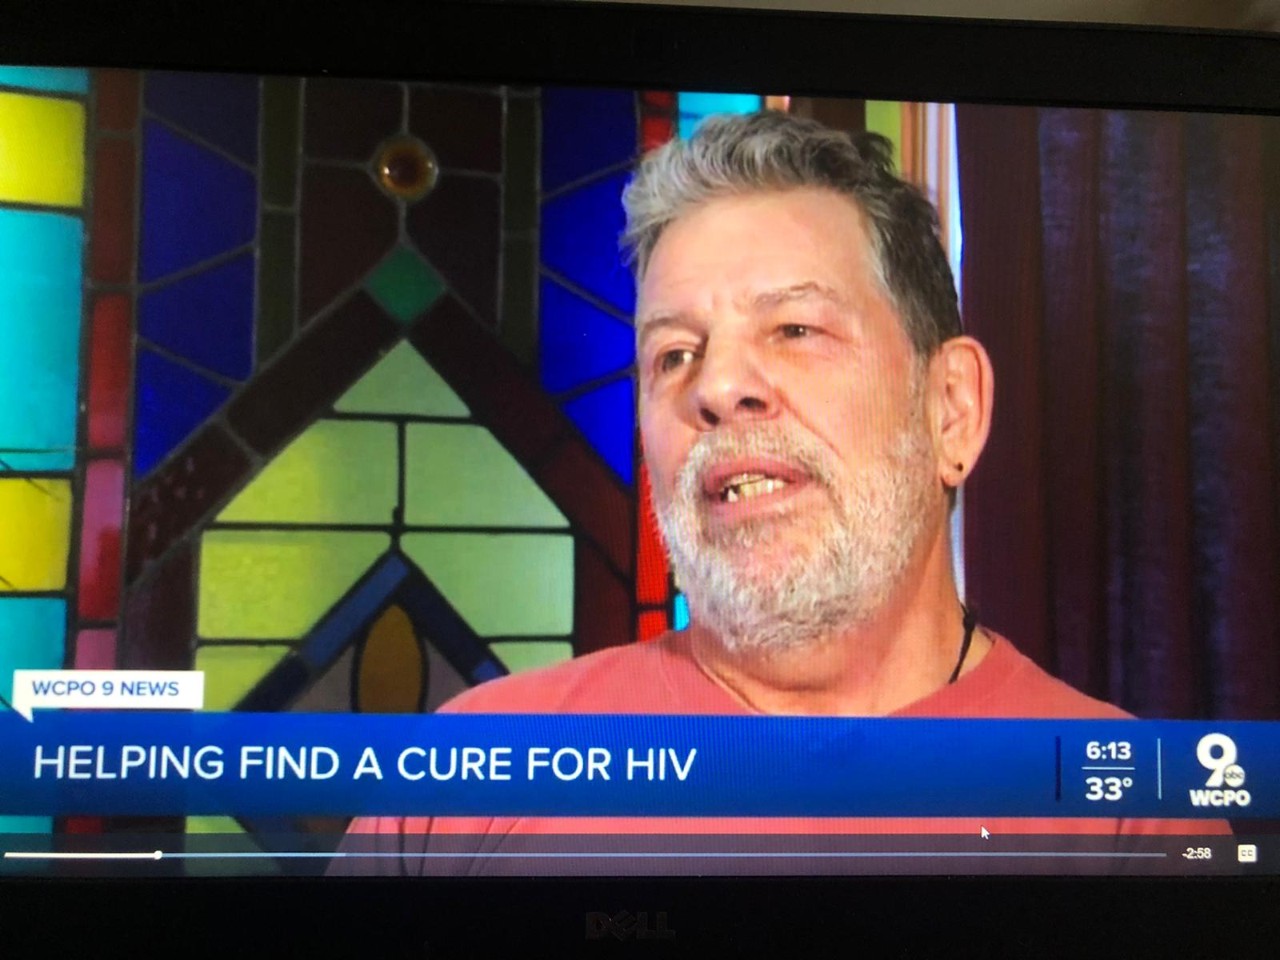 A screen shot from a TV broadcast with a bearded man talking and the headline says helping find a cure for HIV